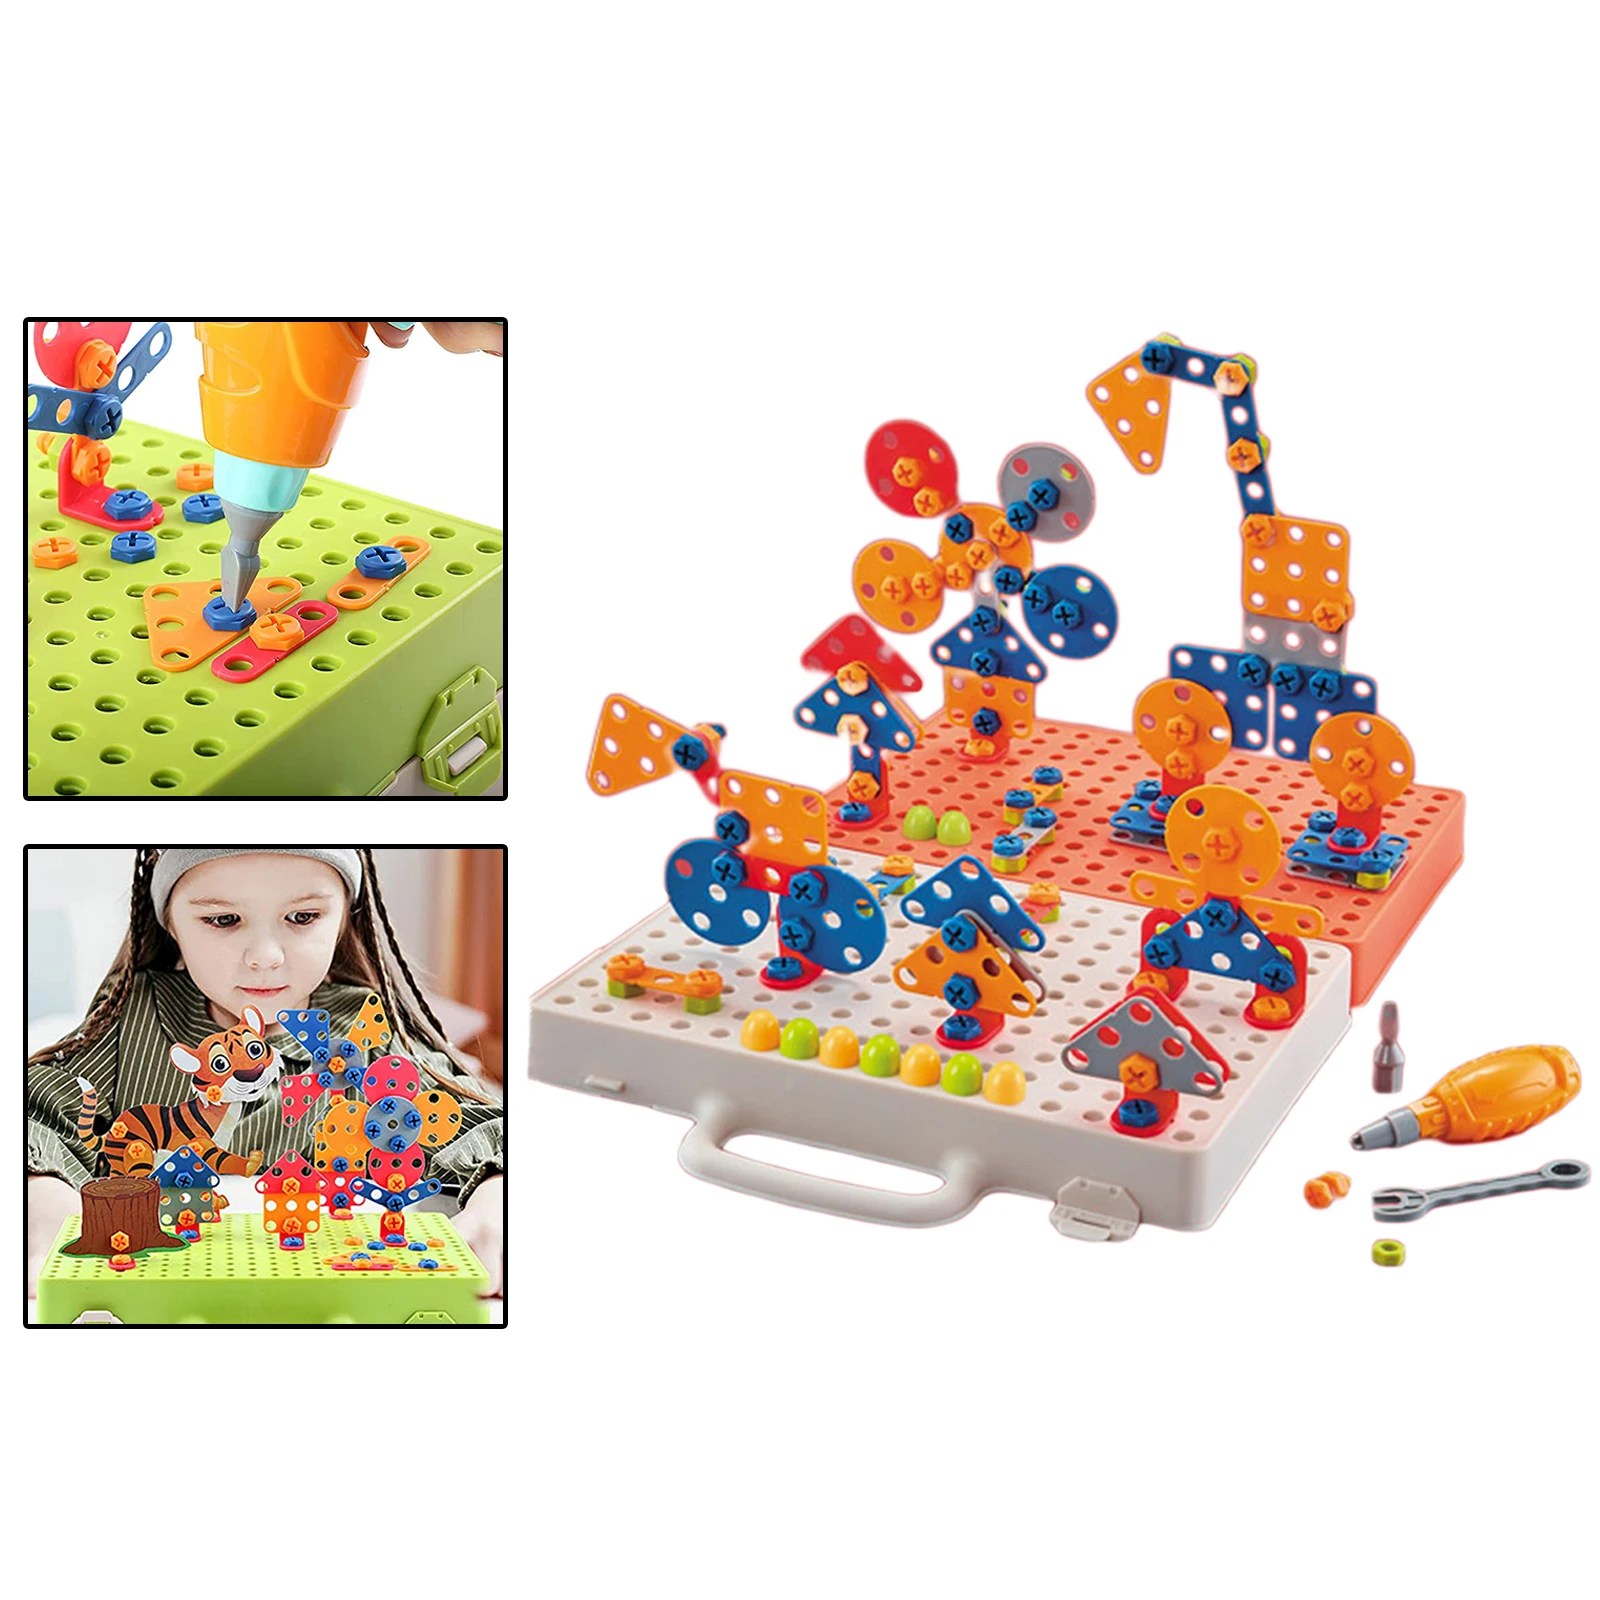 DIY Drilling Screw Creative Puzzle Building Bricks 3D City Technical Electric Gear Set Assembly Educational Toys For Children